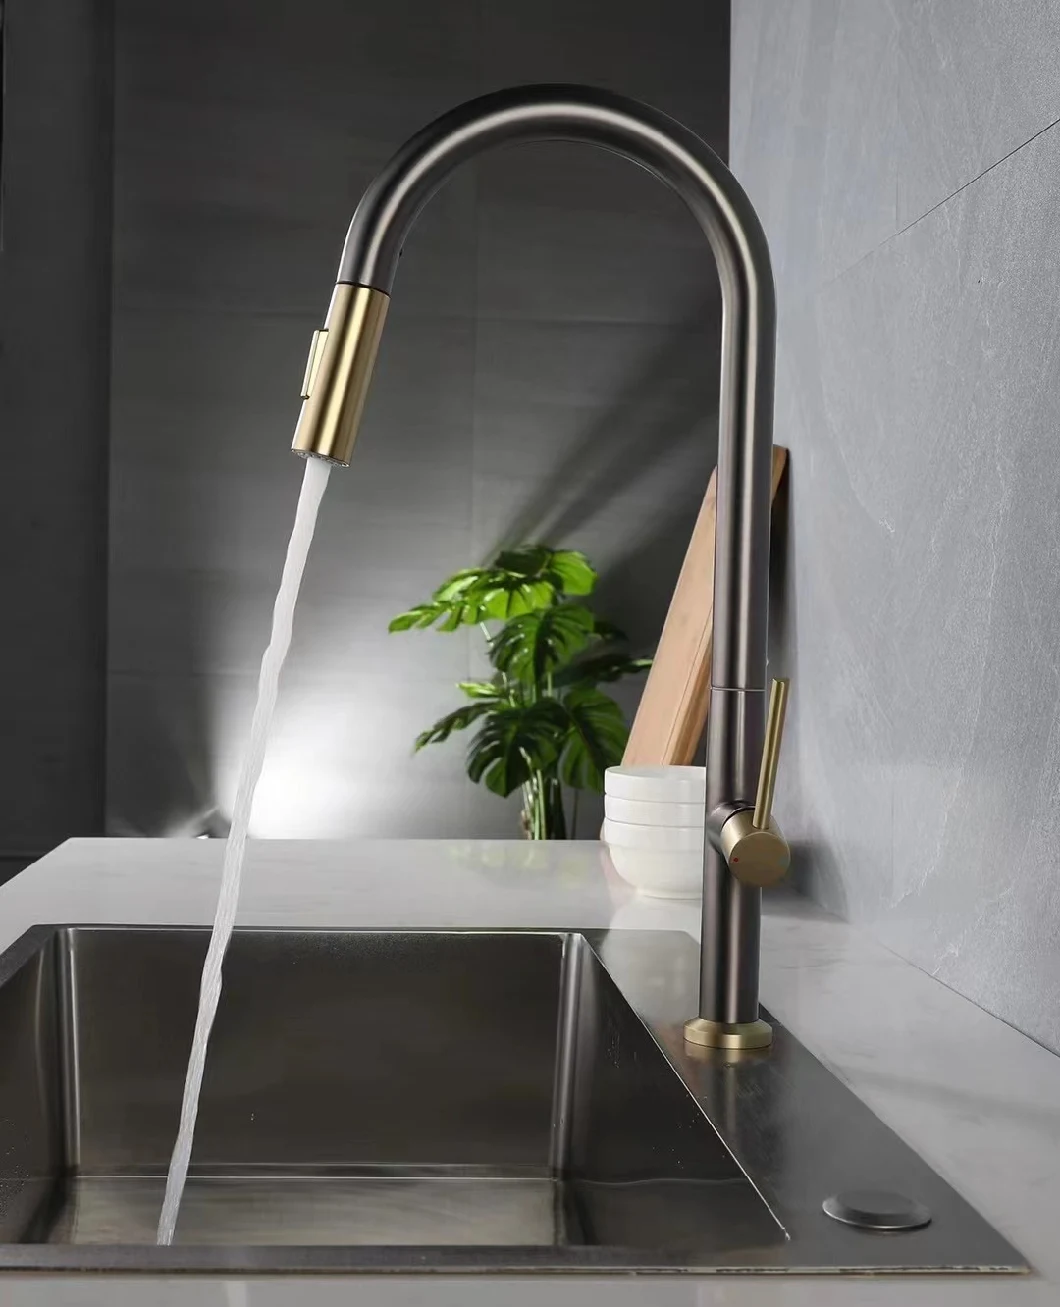 Solid Brass Pull-out Kitchen Sink Faucet